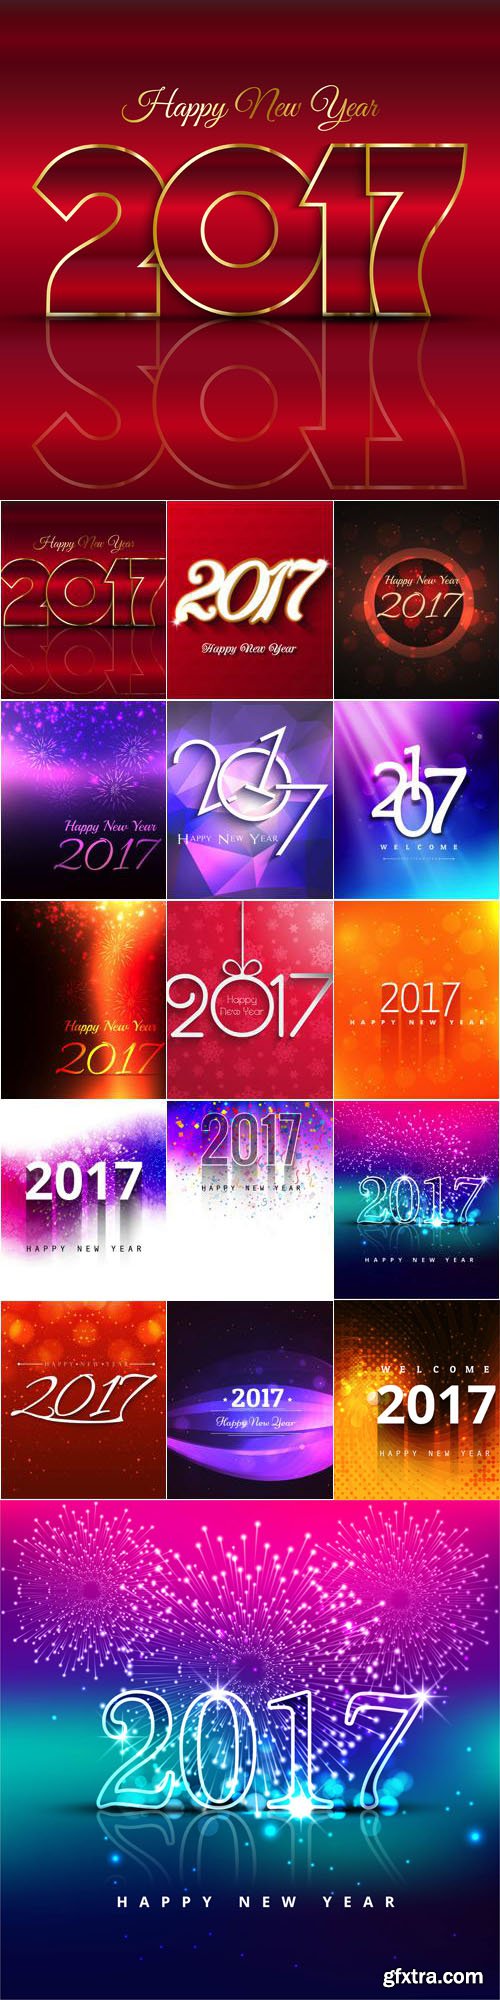 New Year 2017 Vector Backgrounds Vol.4